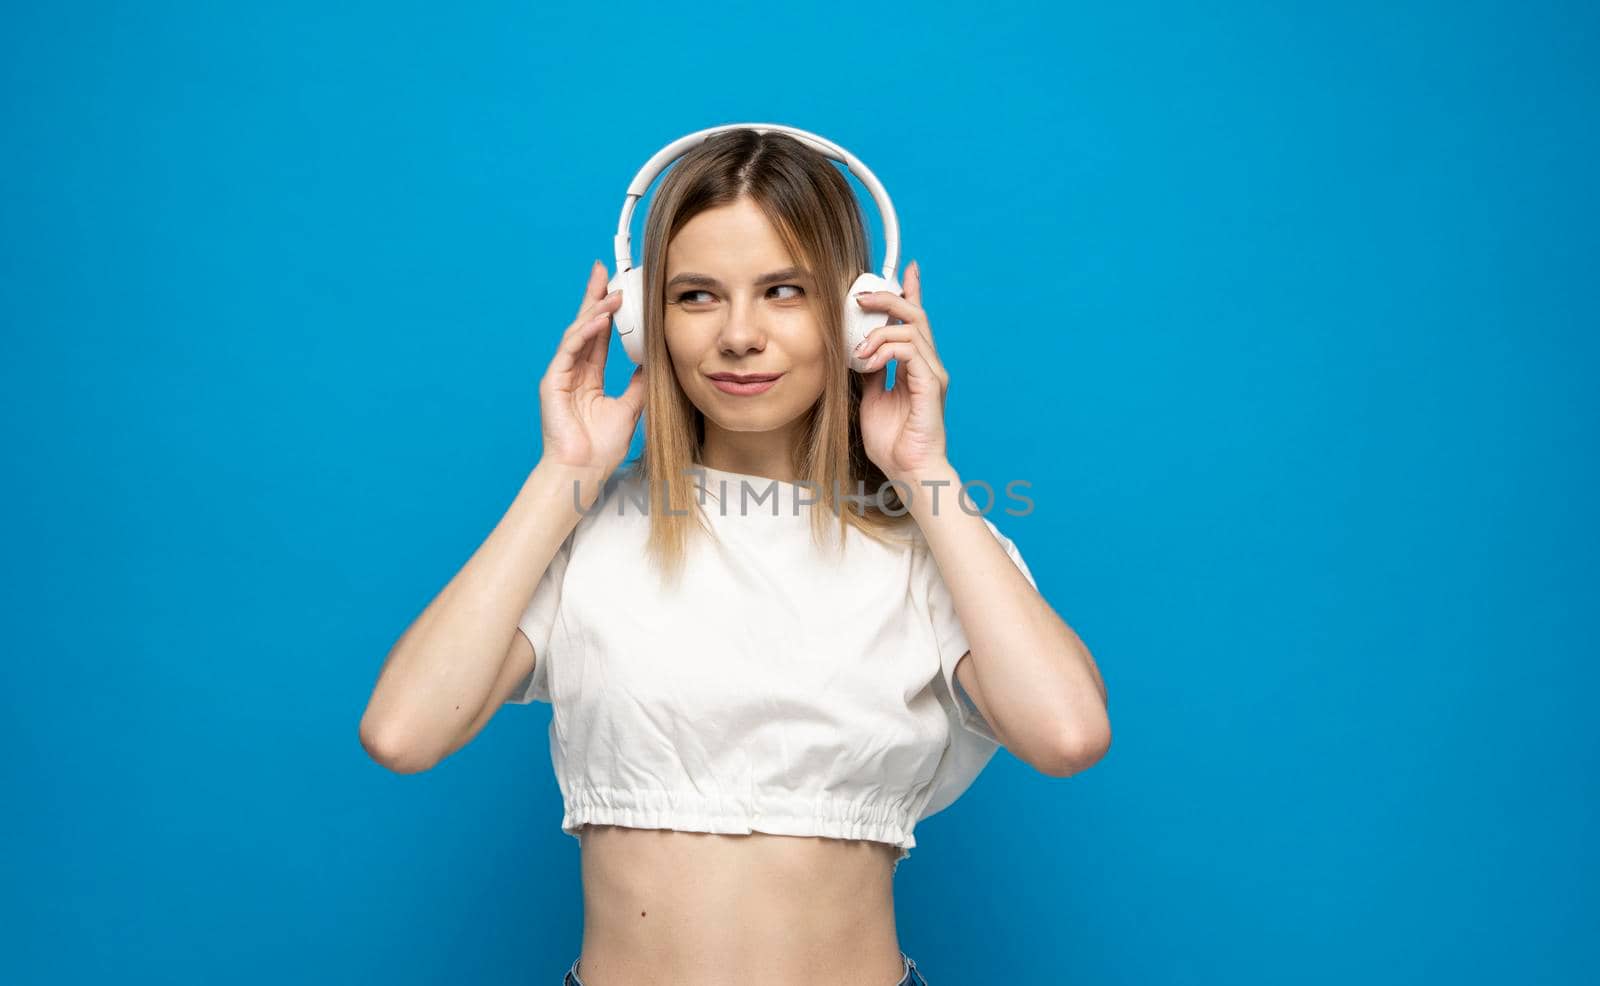 Beautiful young woman in headphones listening to music blue background. Young beautiful woman in bright outfit enjoying a music